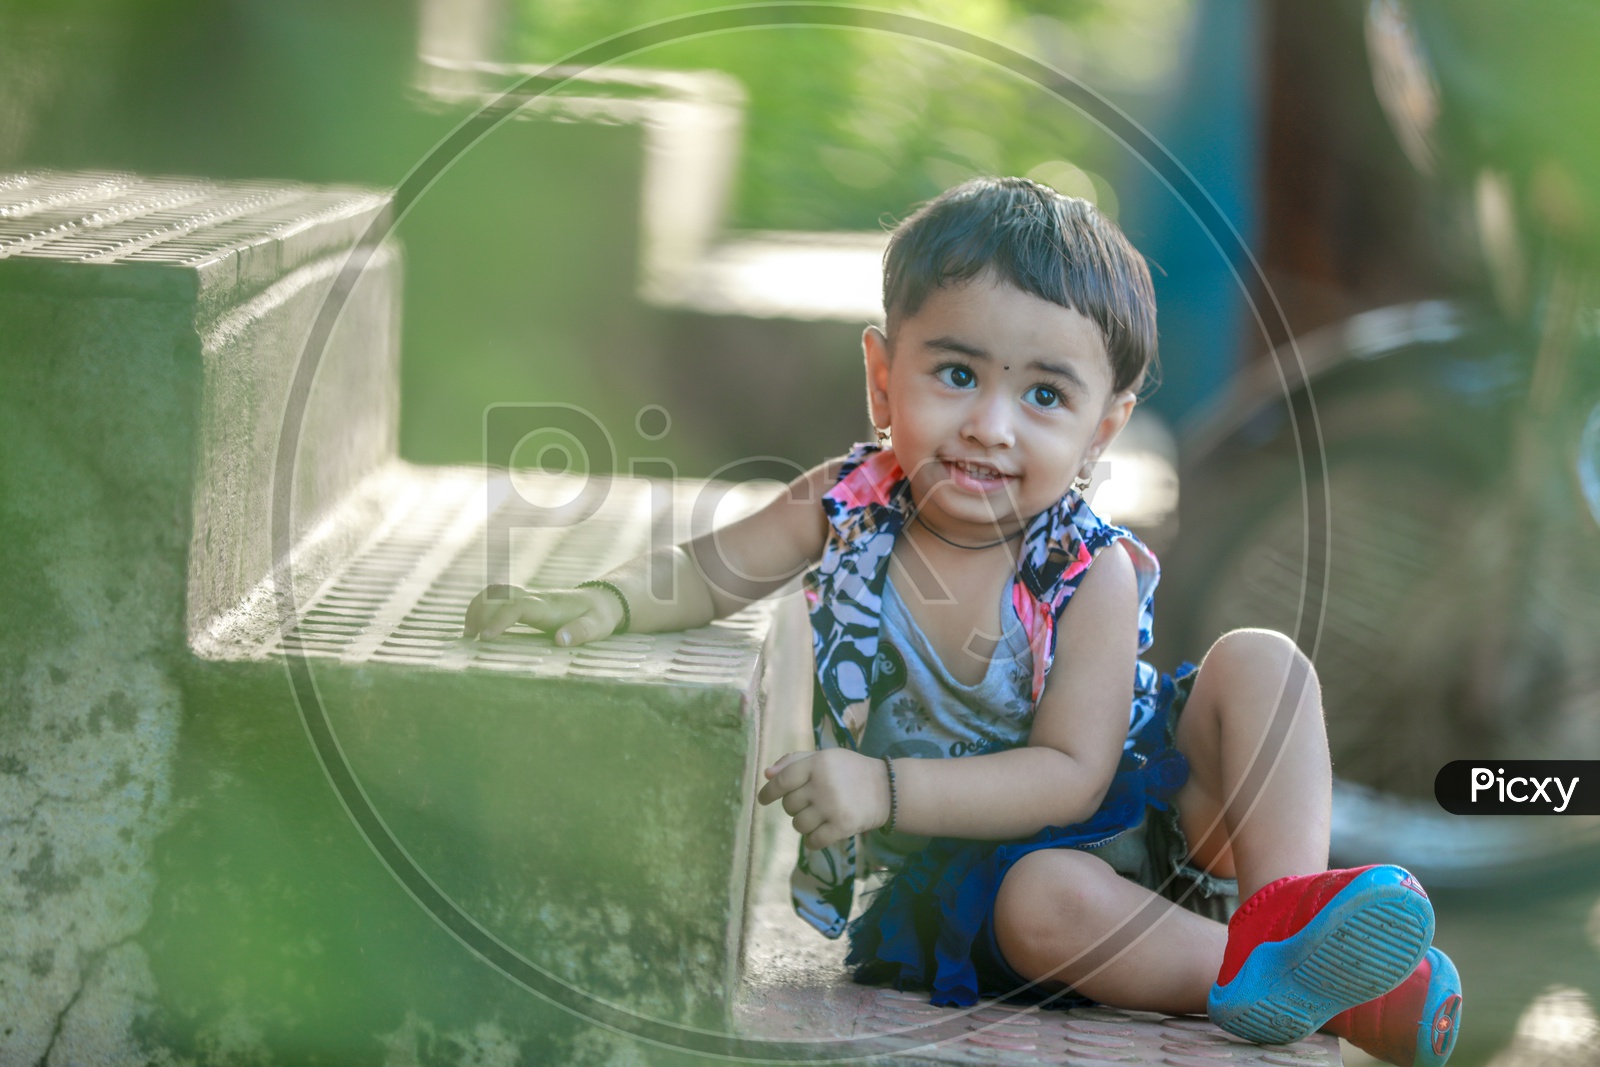 Cute Indian Girl Child Or Baby Girl Playing in a Park